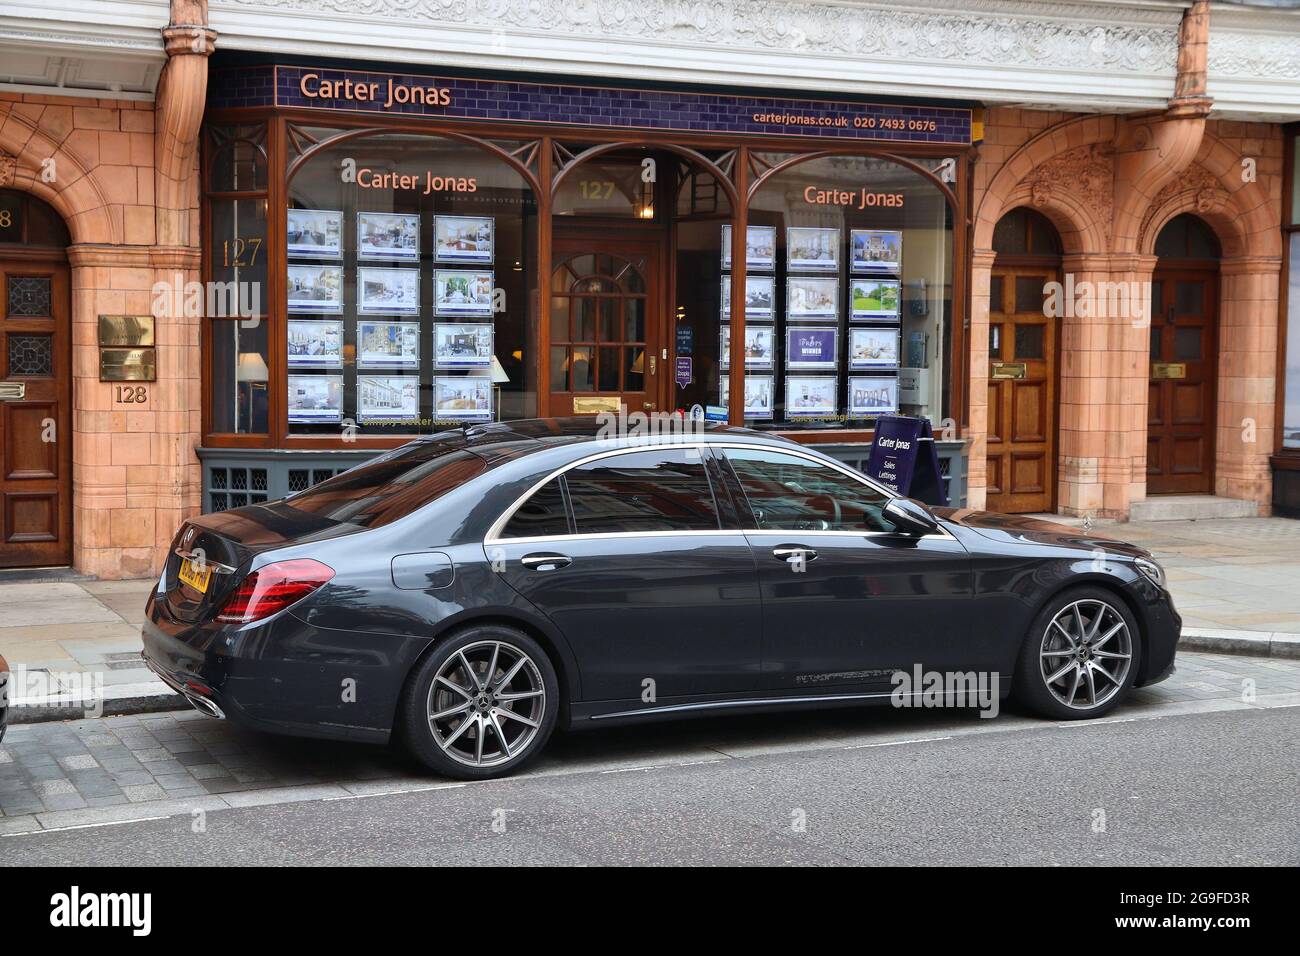 LONDON, UK - JULY 15, 2019: Mercedes-Benz S-Class (W222) luxury executive car parked in London. There are 37.7 million vehicles registered in the UK. Stock Photo